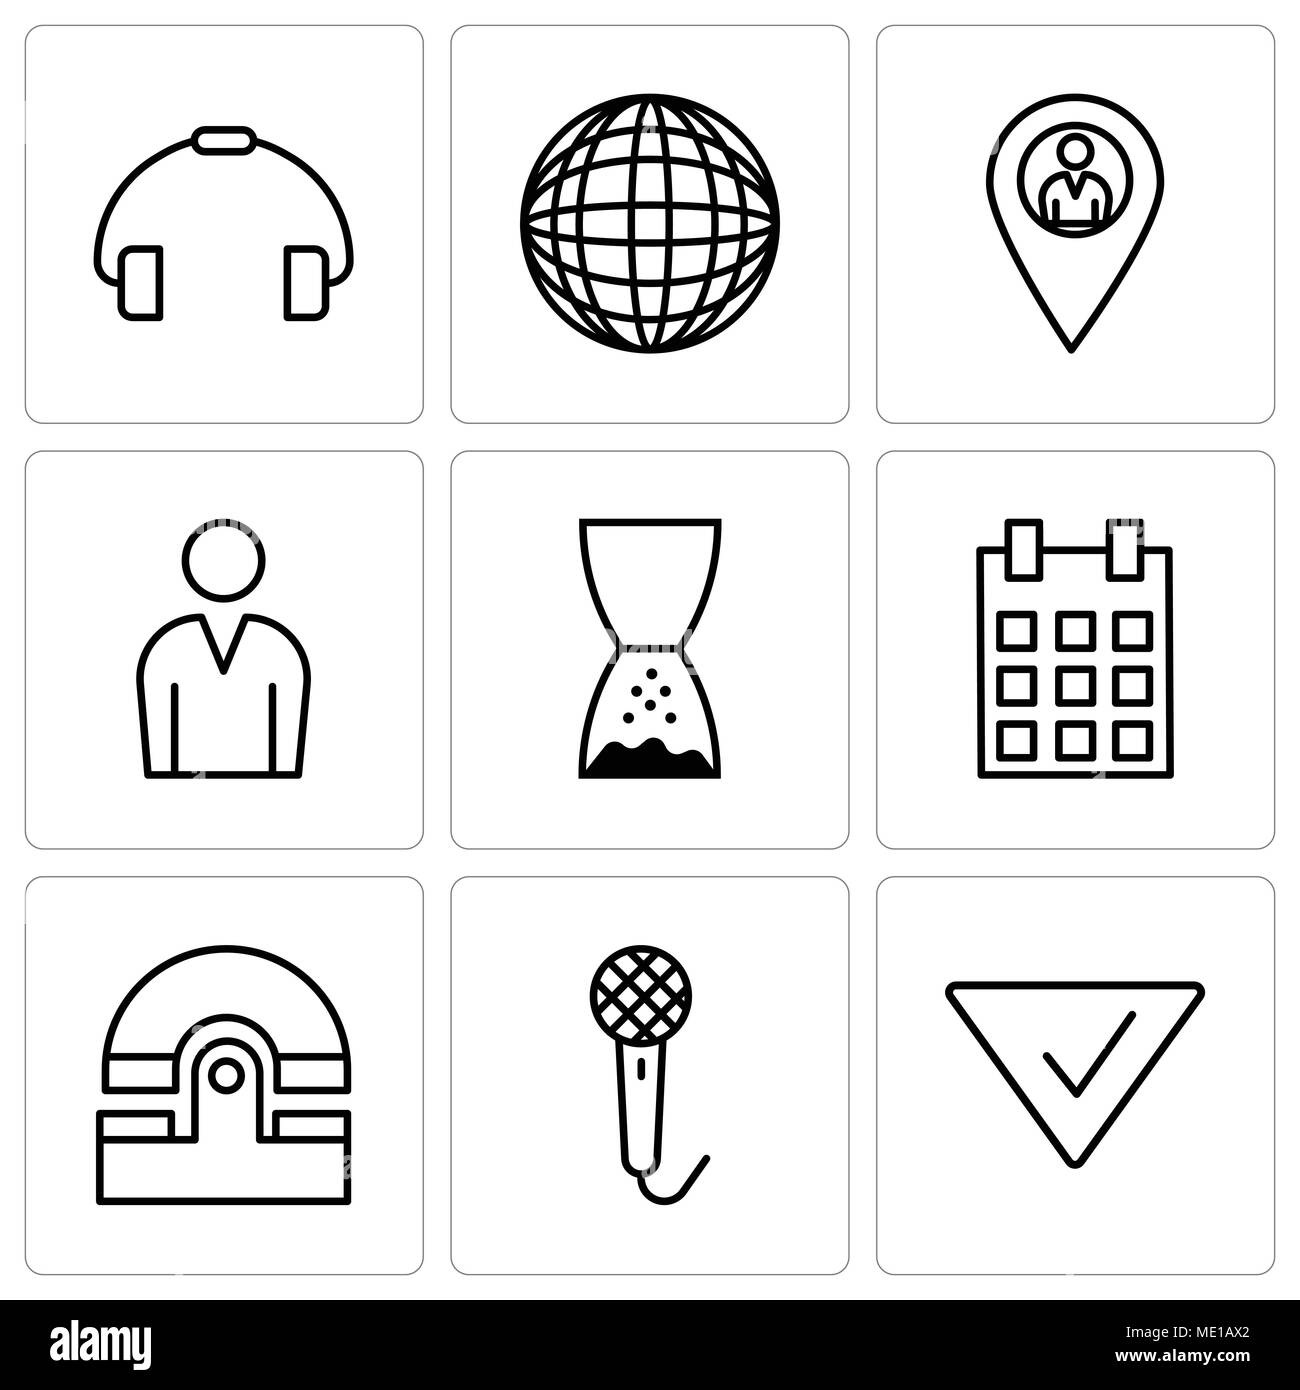 Set Of 9 simple editable icons such as Check mark, Voice recorder, Old phone, Calendar with day 5, Hand pointing to left, Male avatar, Location pointe Stock Vector